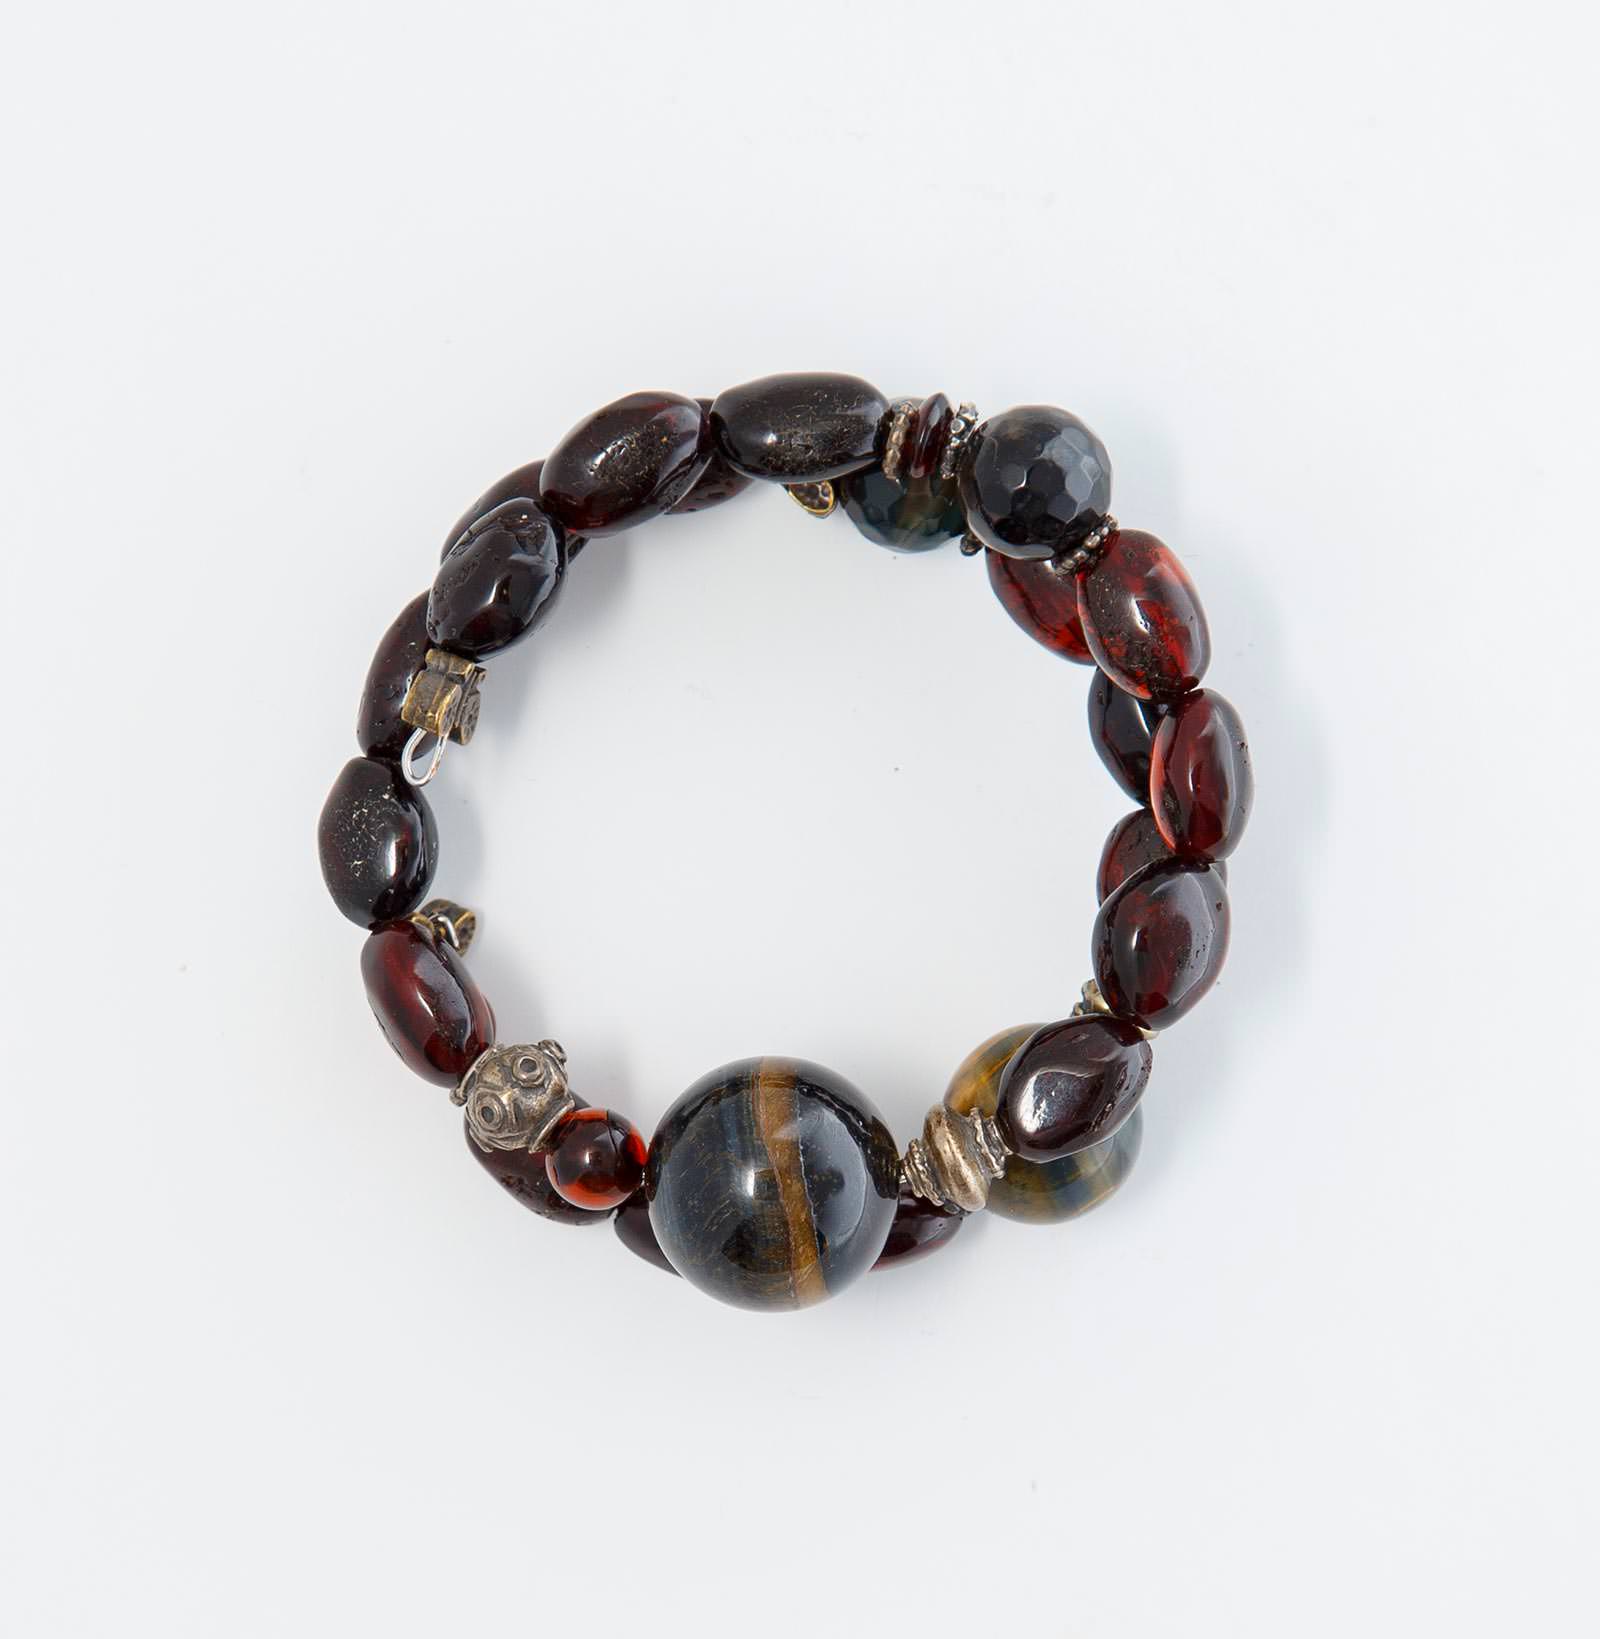 Bracelet made of genuine amber from Baltic sea - cut by hand, Tiger Eye, Fire Jade, silver and tin.